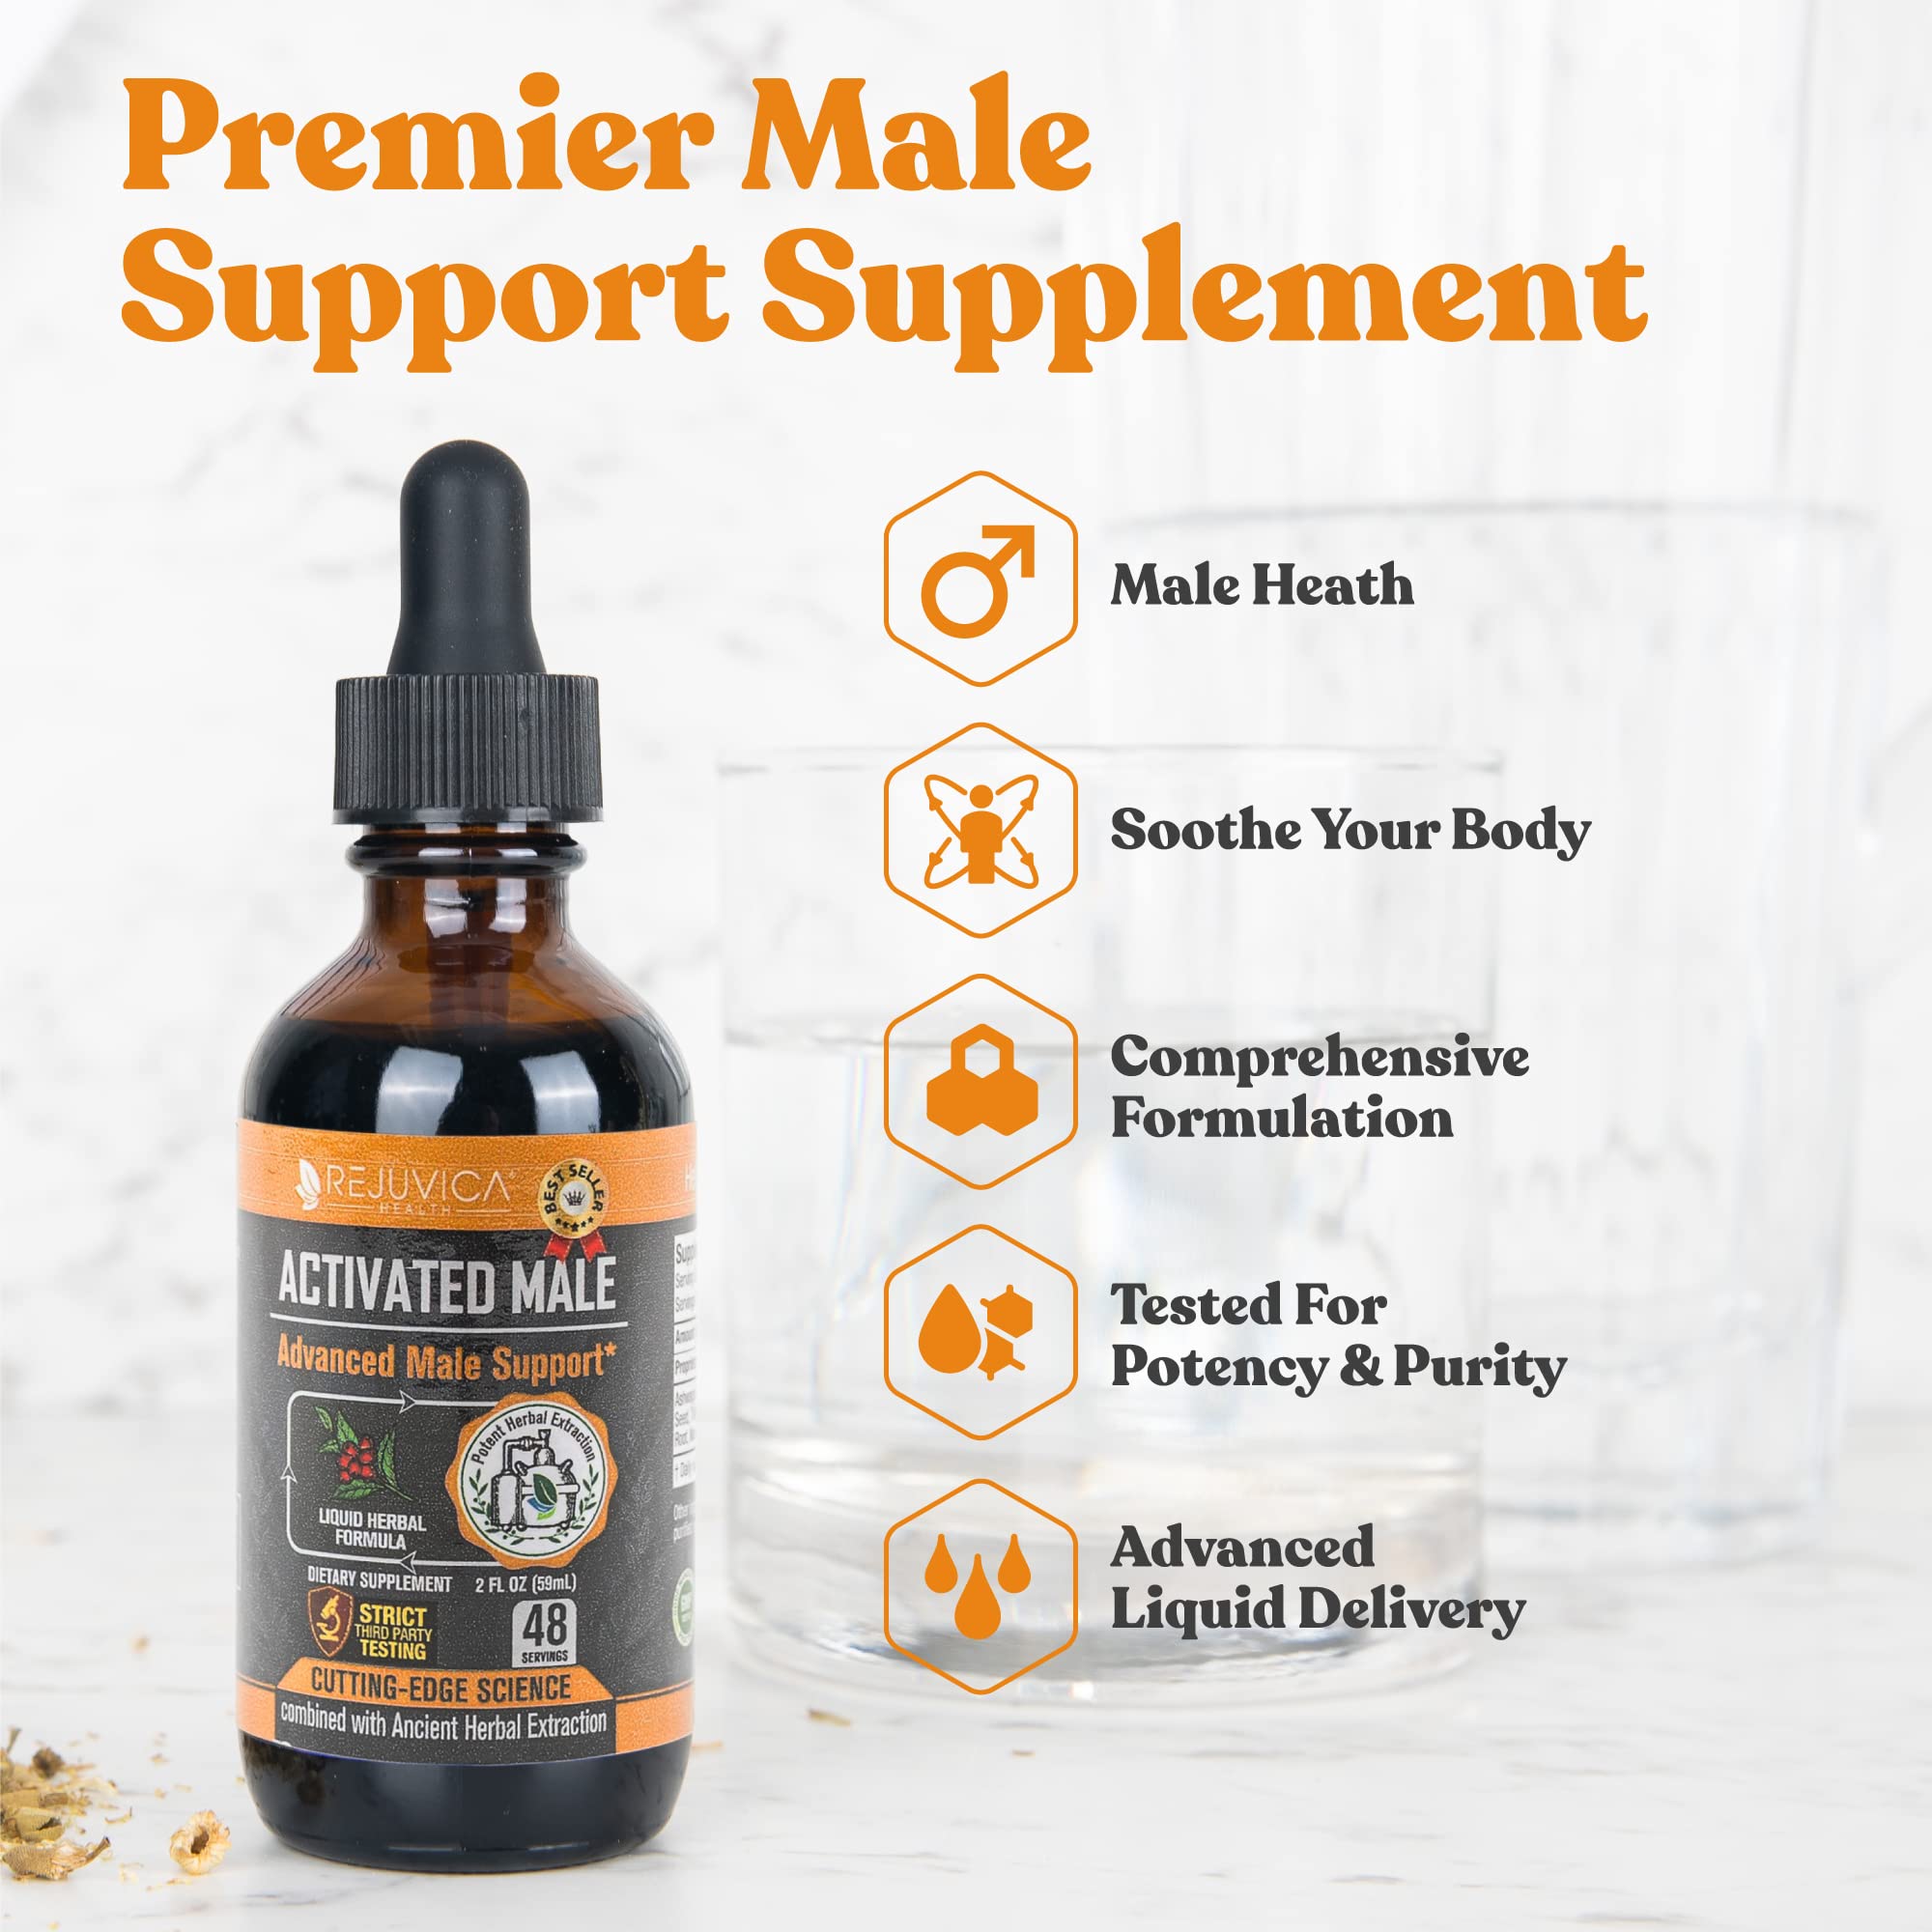 Rejuvica Health Activated Male - Advanced Male Libido Support Tincture - Enhanced Liquid Delivery for Better Absorption - Ashwagandha, Mucuna, Tongkat Ali, Tribulus & More!